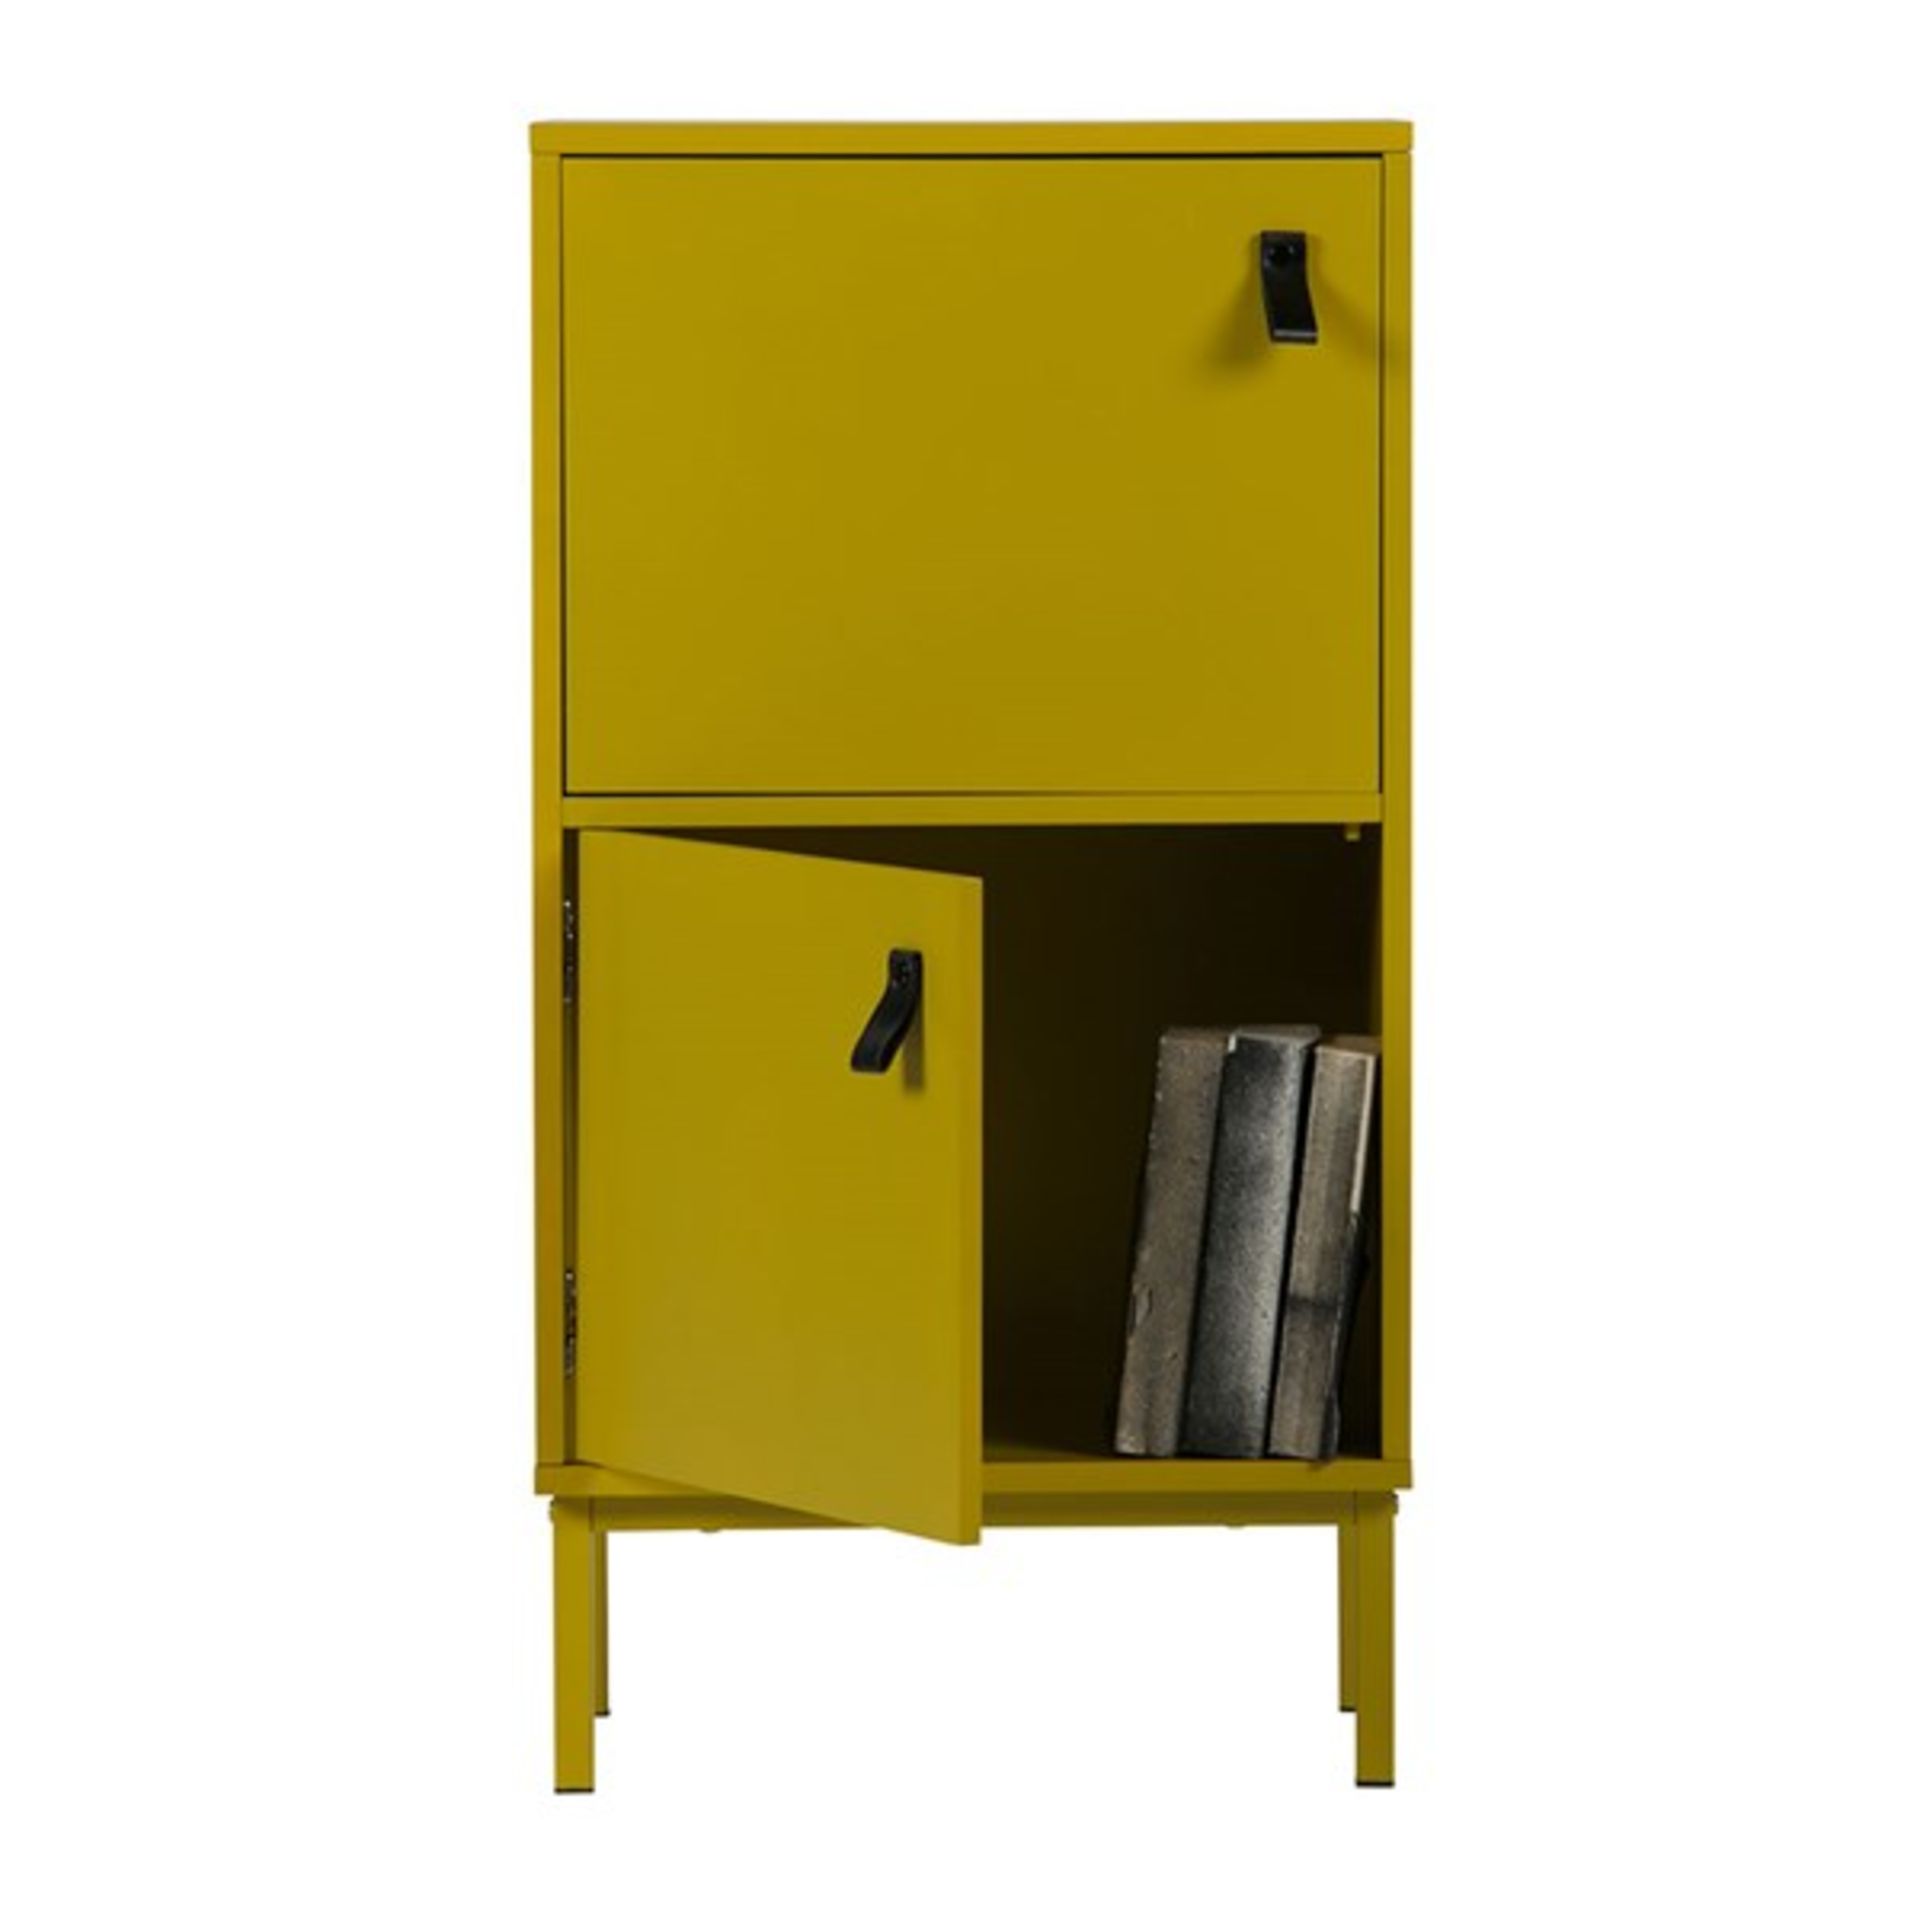 1 x WOOOD 'NICO' Contemporary 2-Door Cabinet In Mustard With Leather Handles - Brand New Boxed Stock - Image 2 of 3